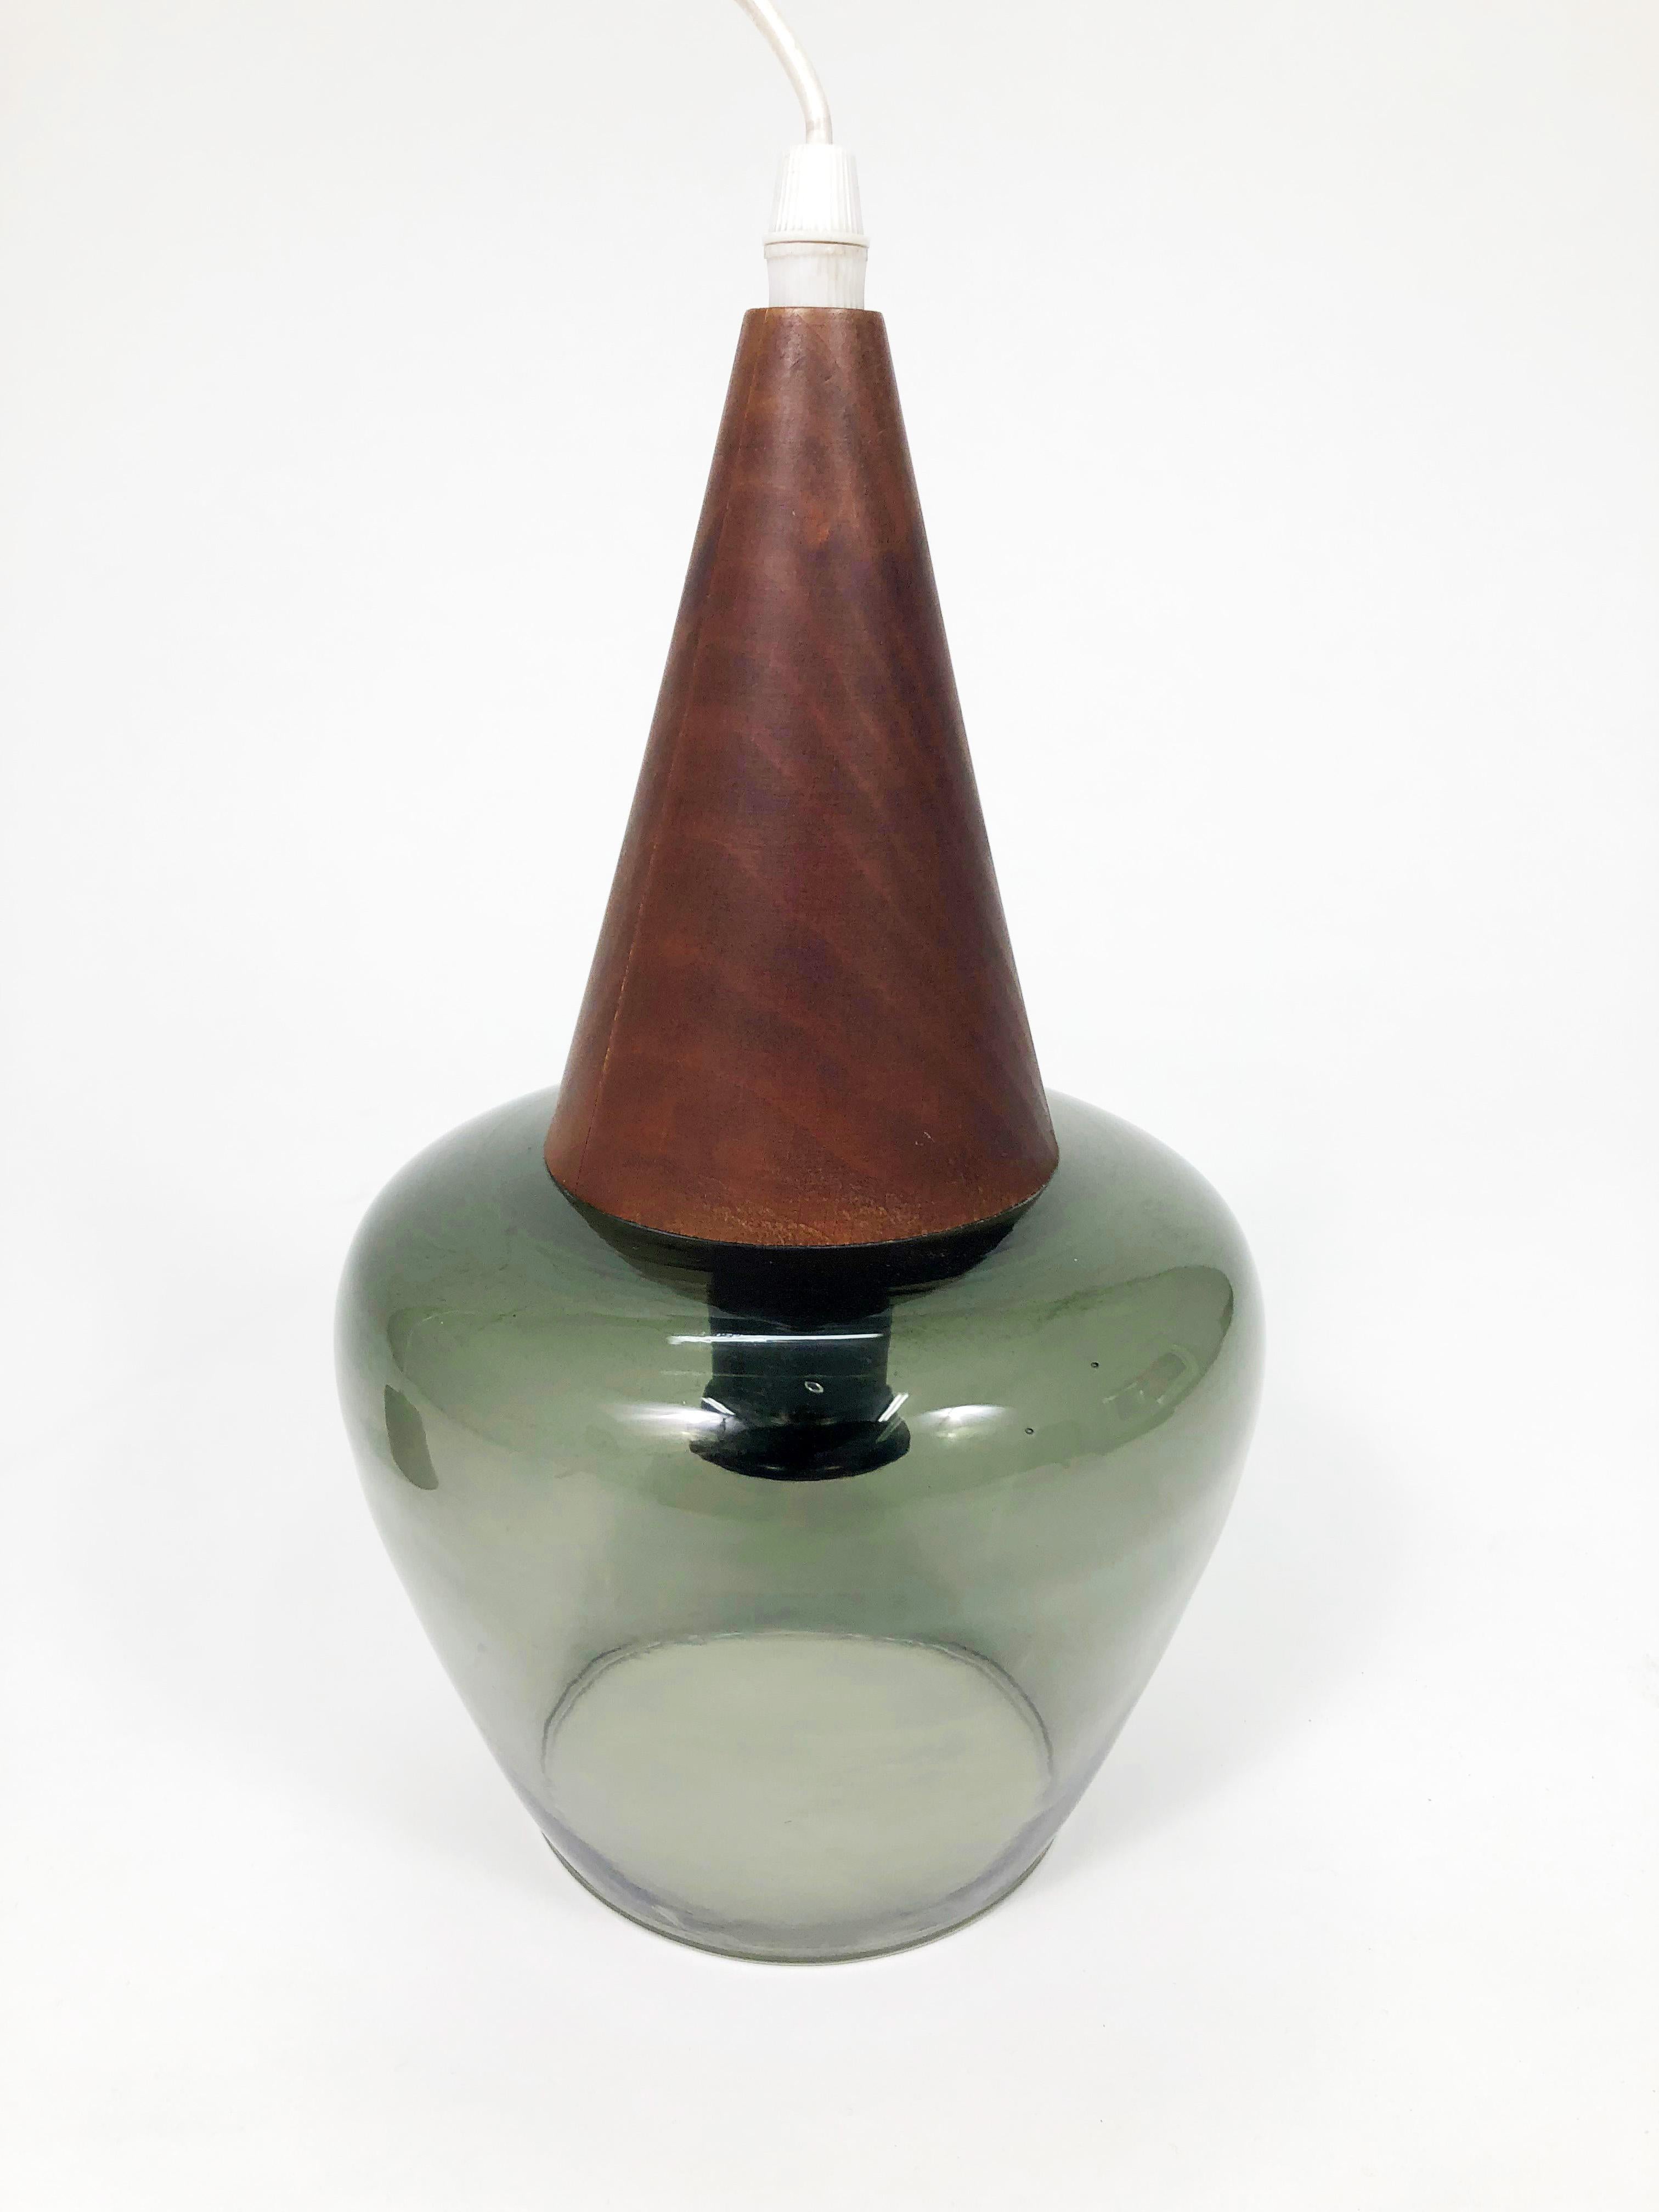 A handsome vintage mid-century Scandinavian hand-blown green glass pendant lamp.

Walnut veneer covers the metal cone hood above the glass shade.

Black cast-metal ceiling canopy with brass fitting included. Canopy dimensions: 2.86 in. D x 3 in.